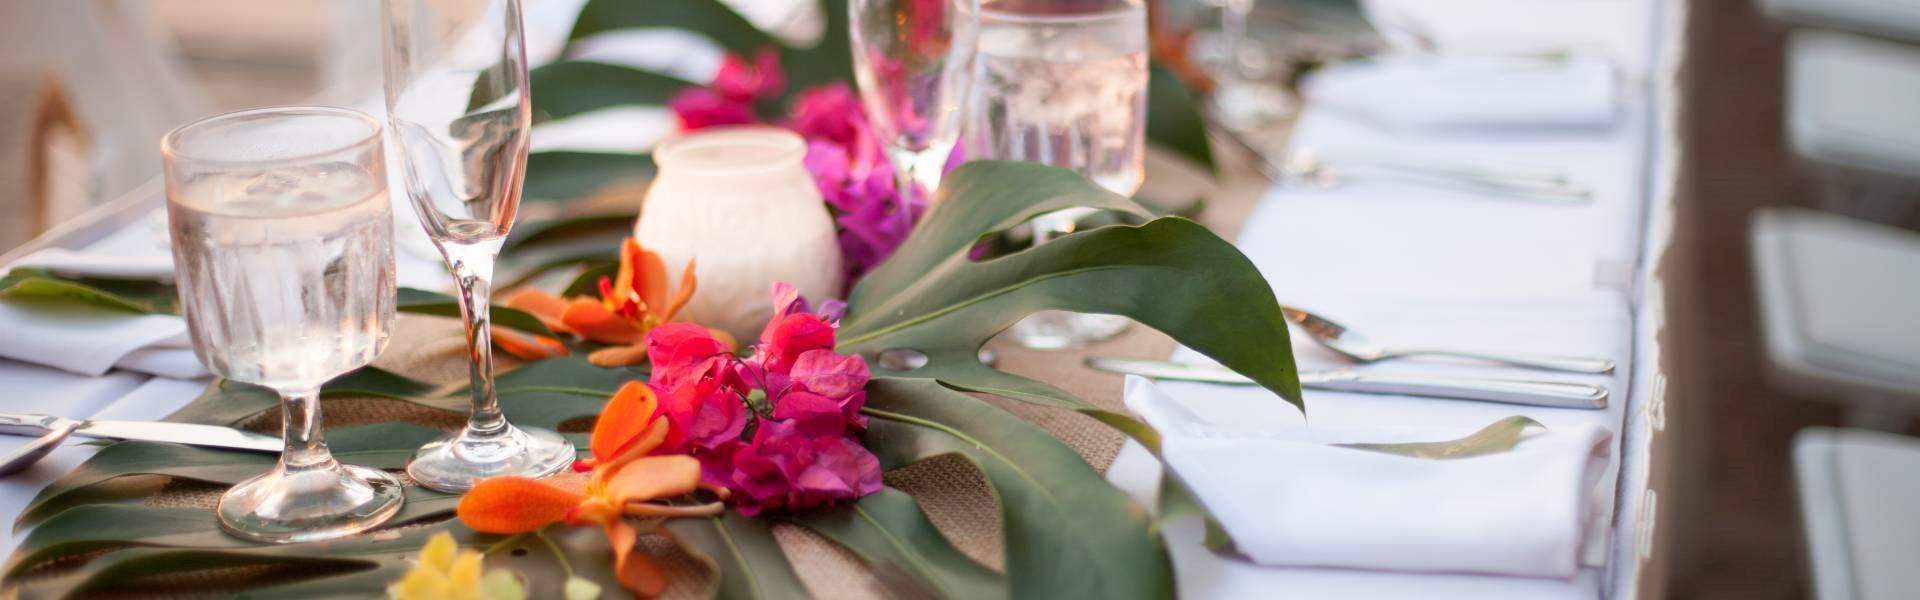 table settings with bright pink flower arrangements